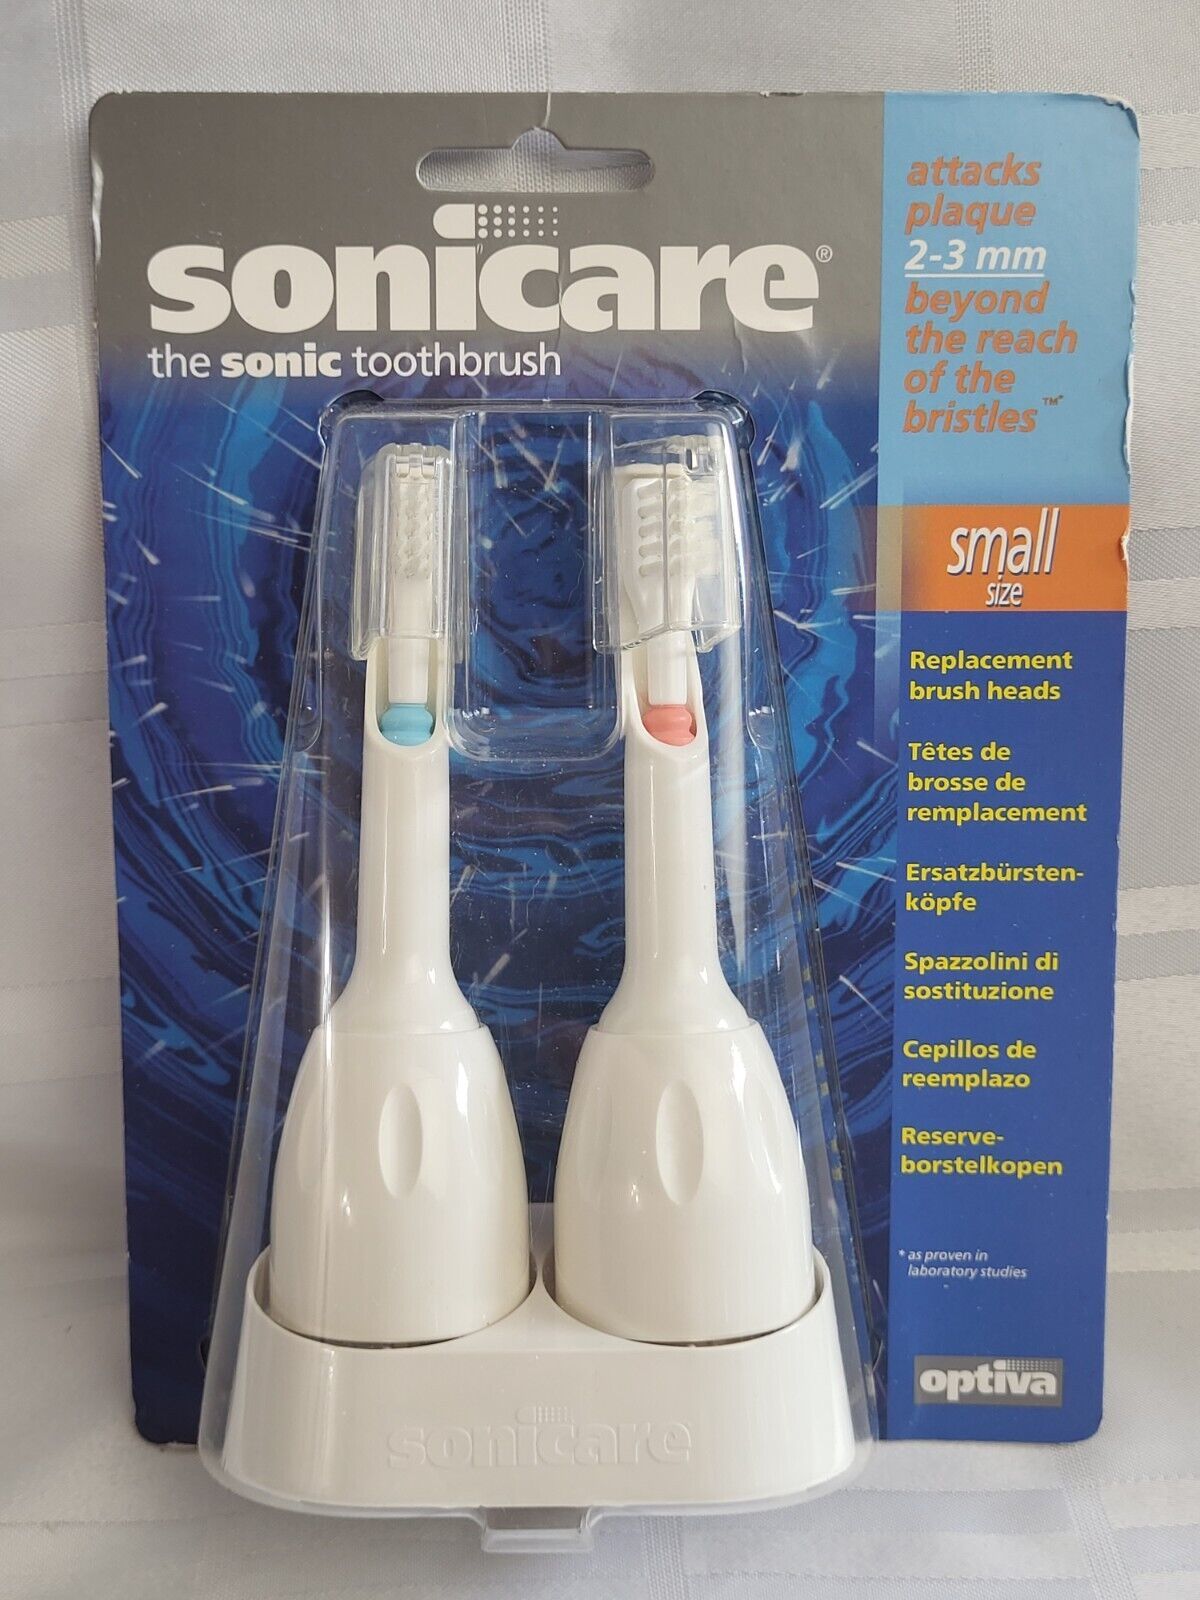 SONICARE SONIC TOOTHBRUSH HEAD REPLACEMENTS SIZE SMALL 2-3MM NIP IN THE PACK - $29.99